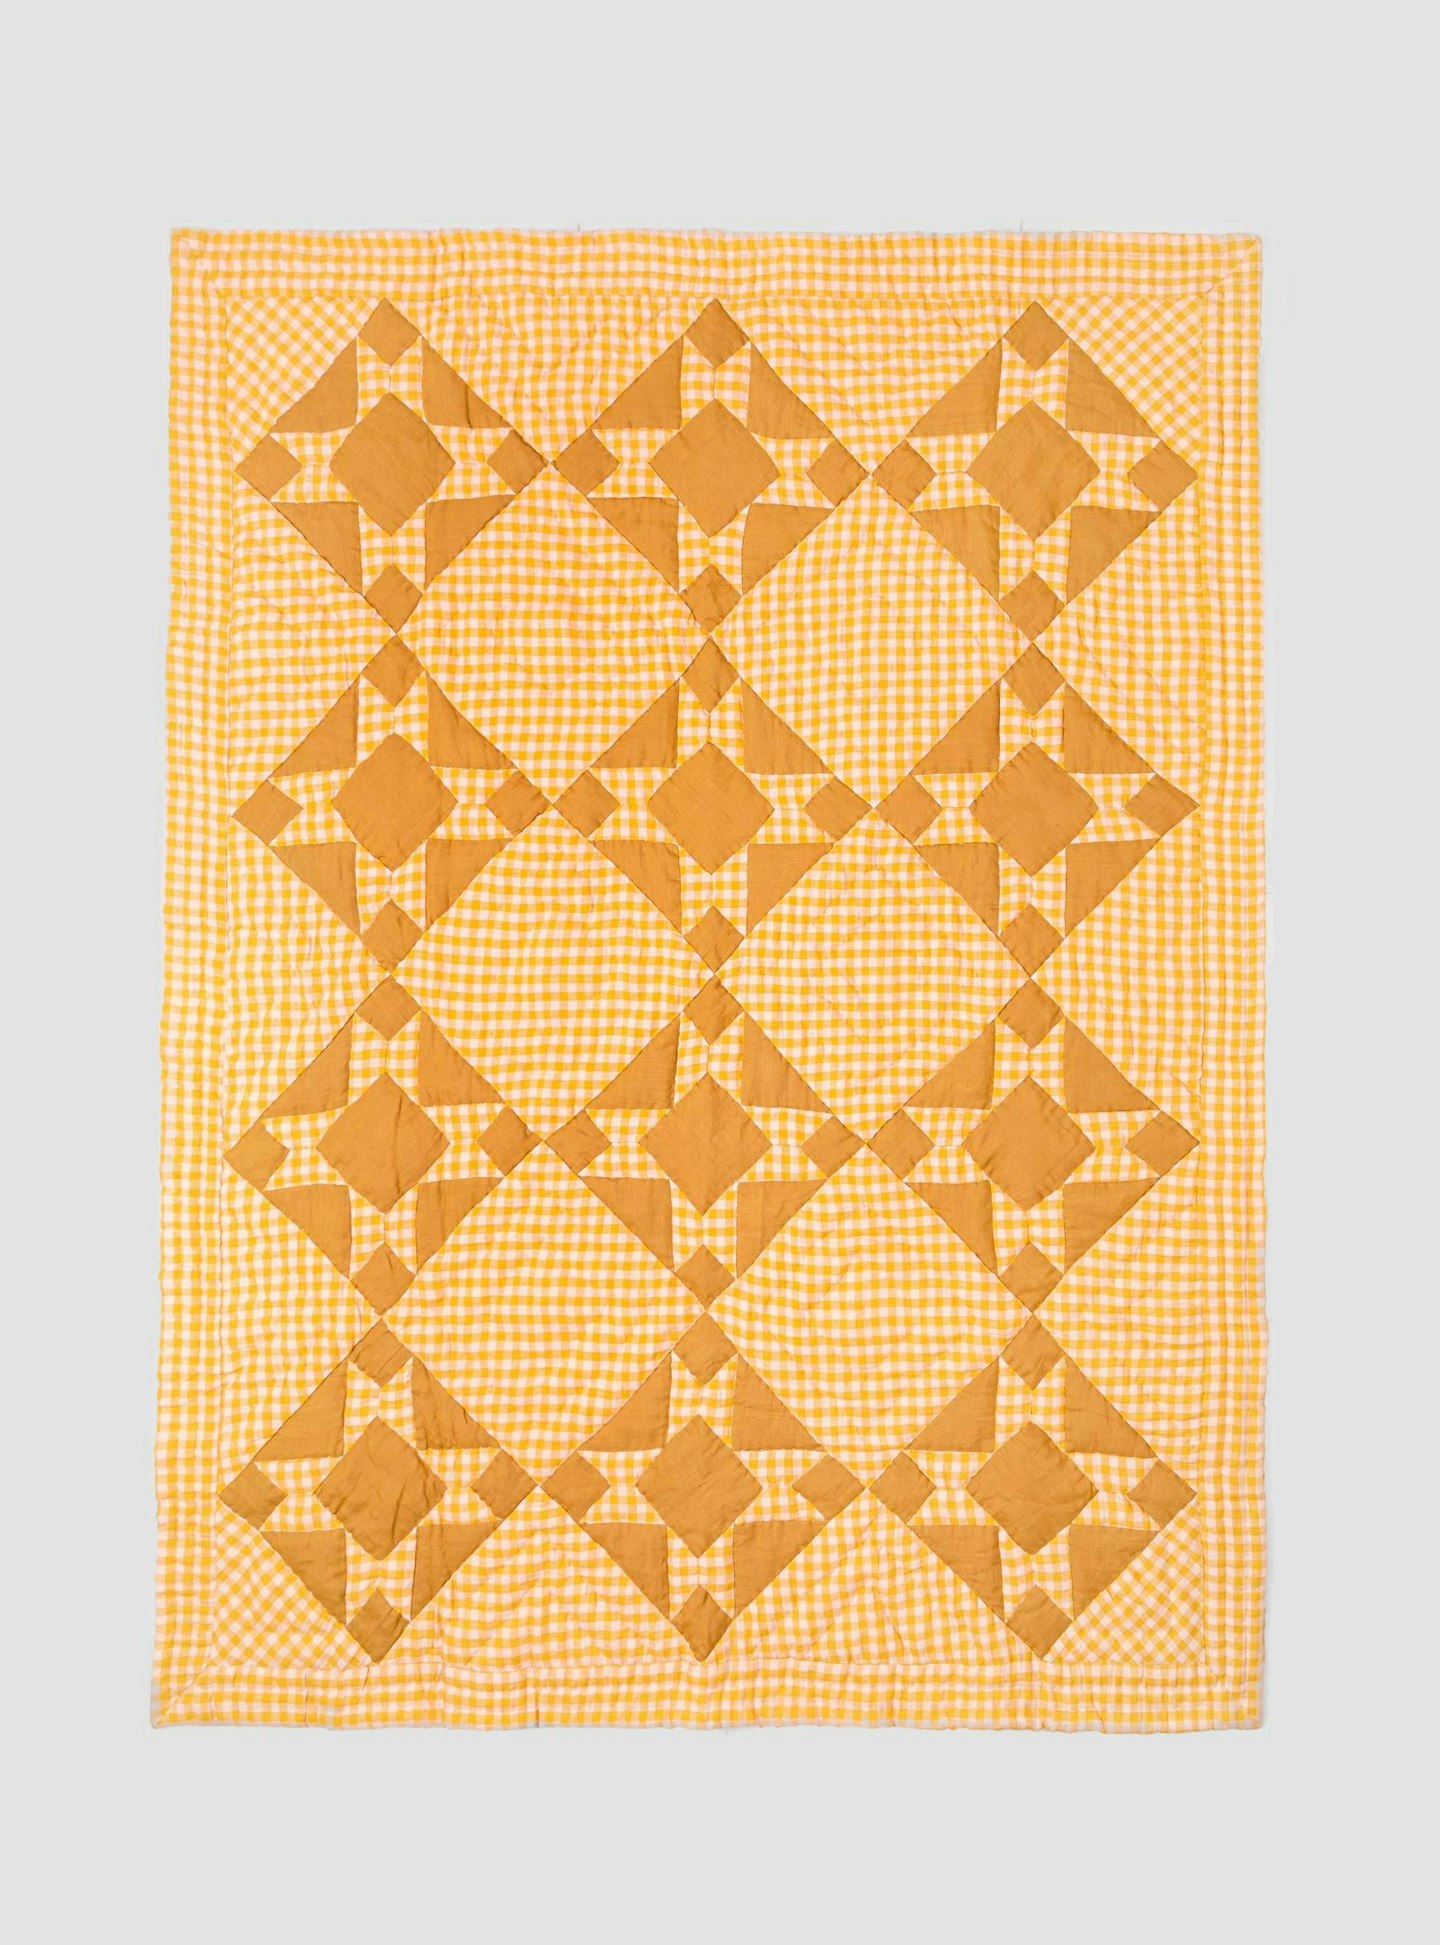 Projecktityyny, Wes Patchwork Gingham Quilt Mustard, £295